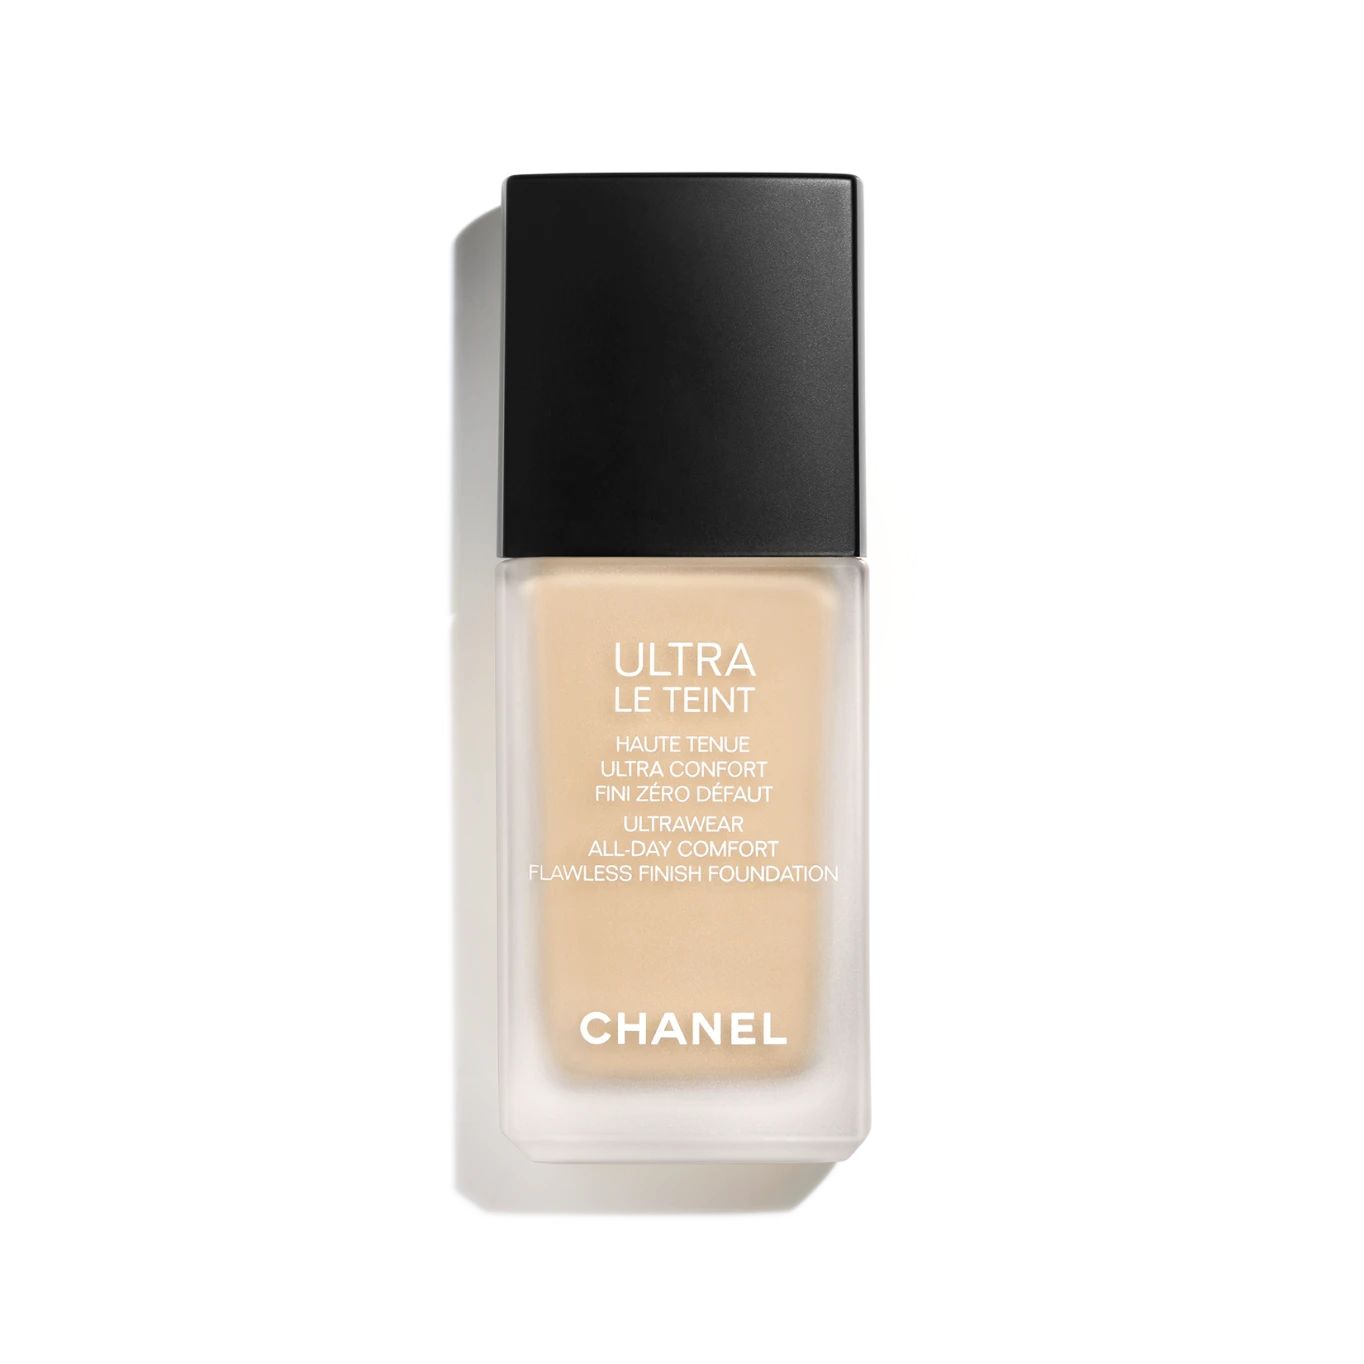 ULTRA LE TEINT

            
            Ultrawear All-Day Comfort Flawless Finish Foundation | Chanel, Inc. (US)